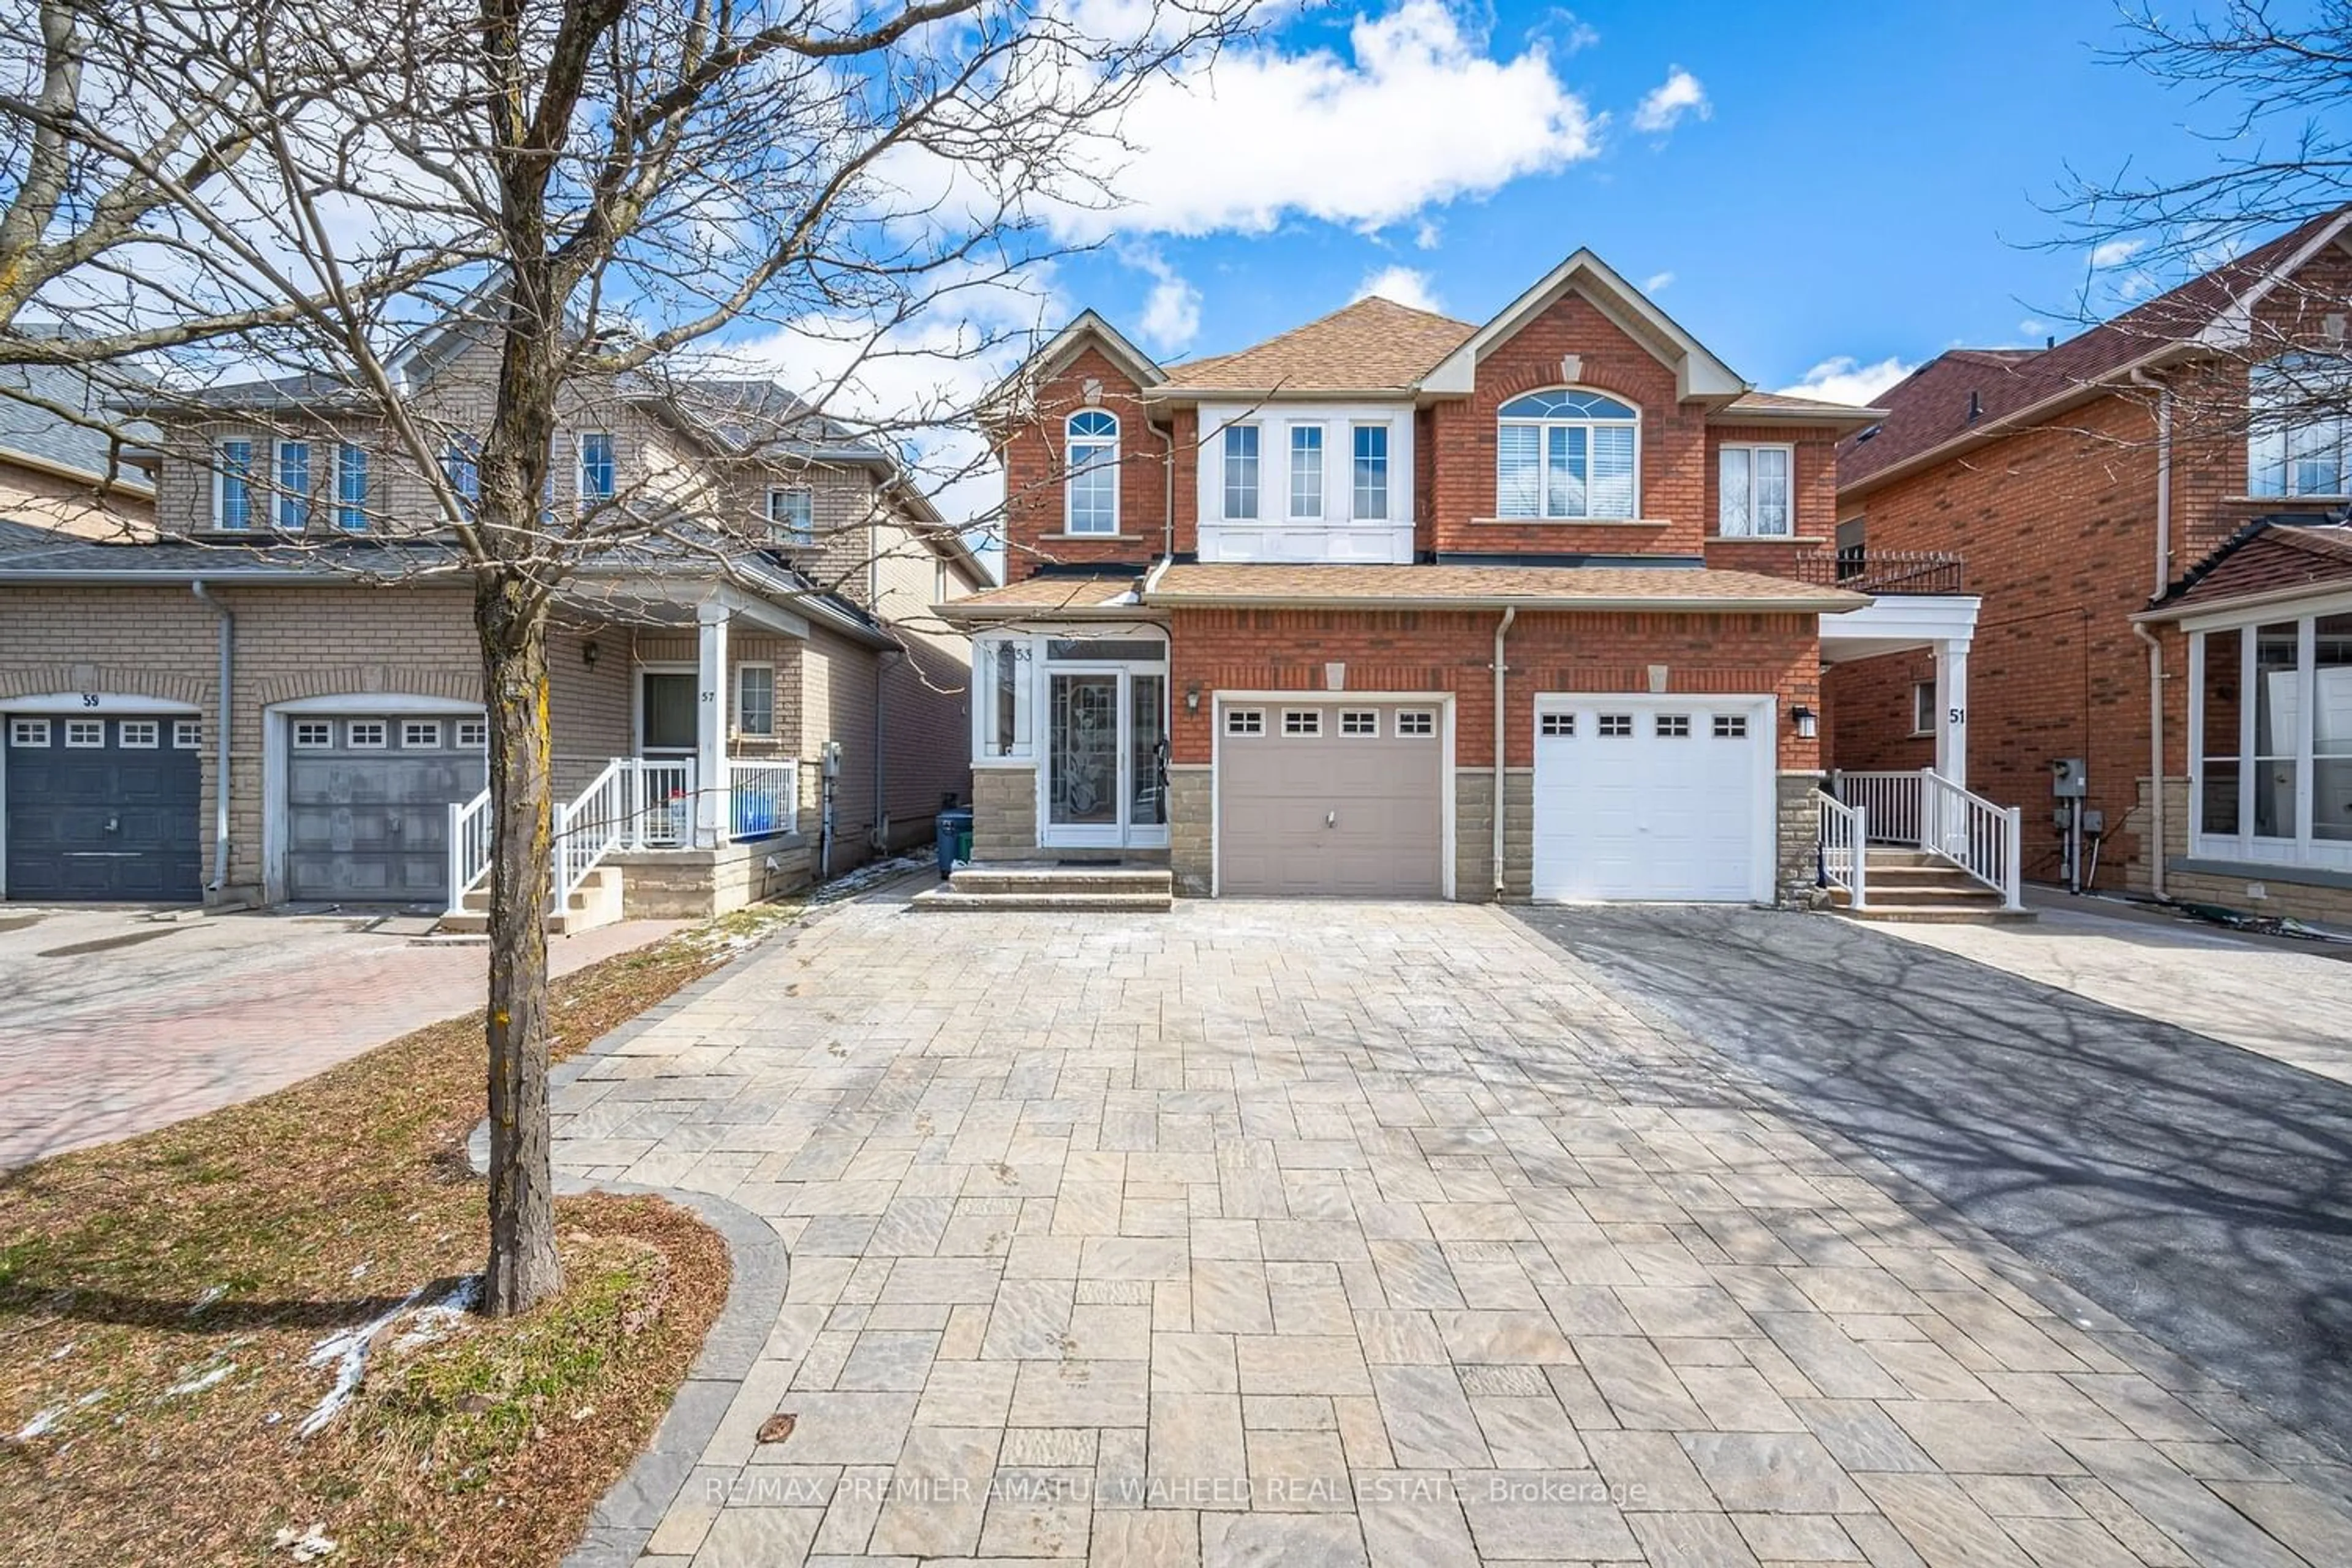 Home with brick exterior material for 53 Bashir St, Vaughan Ontario L6A 3A9